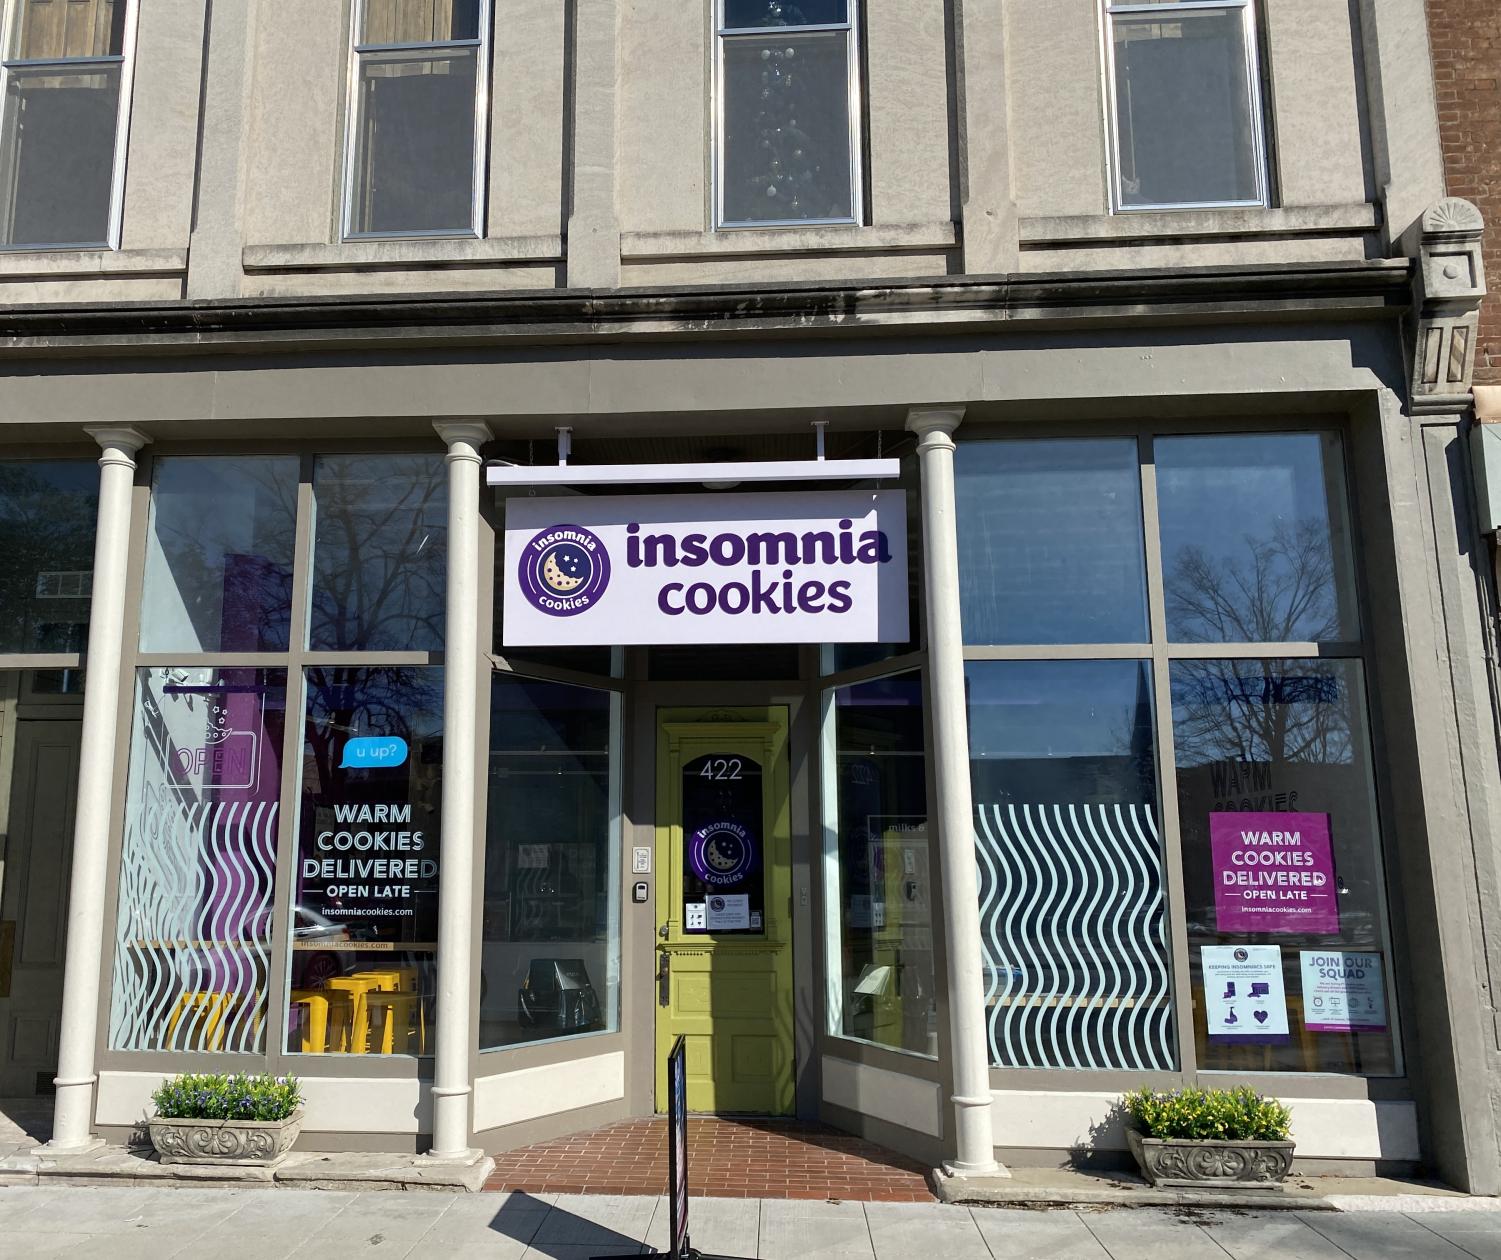 Insomnia Cookies to hold pajamaparty themed grand opening